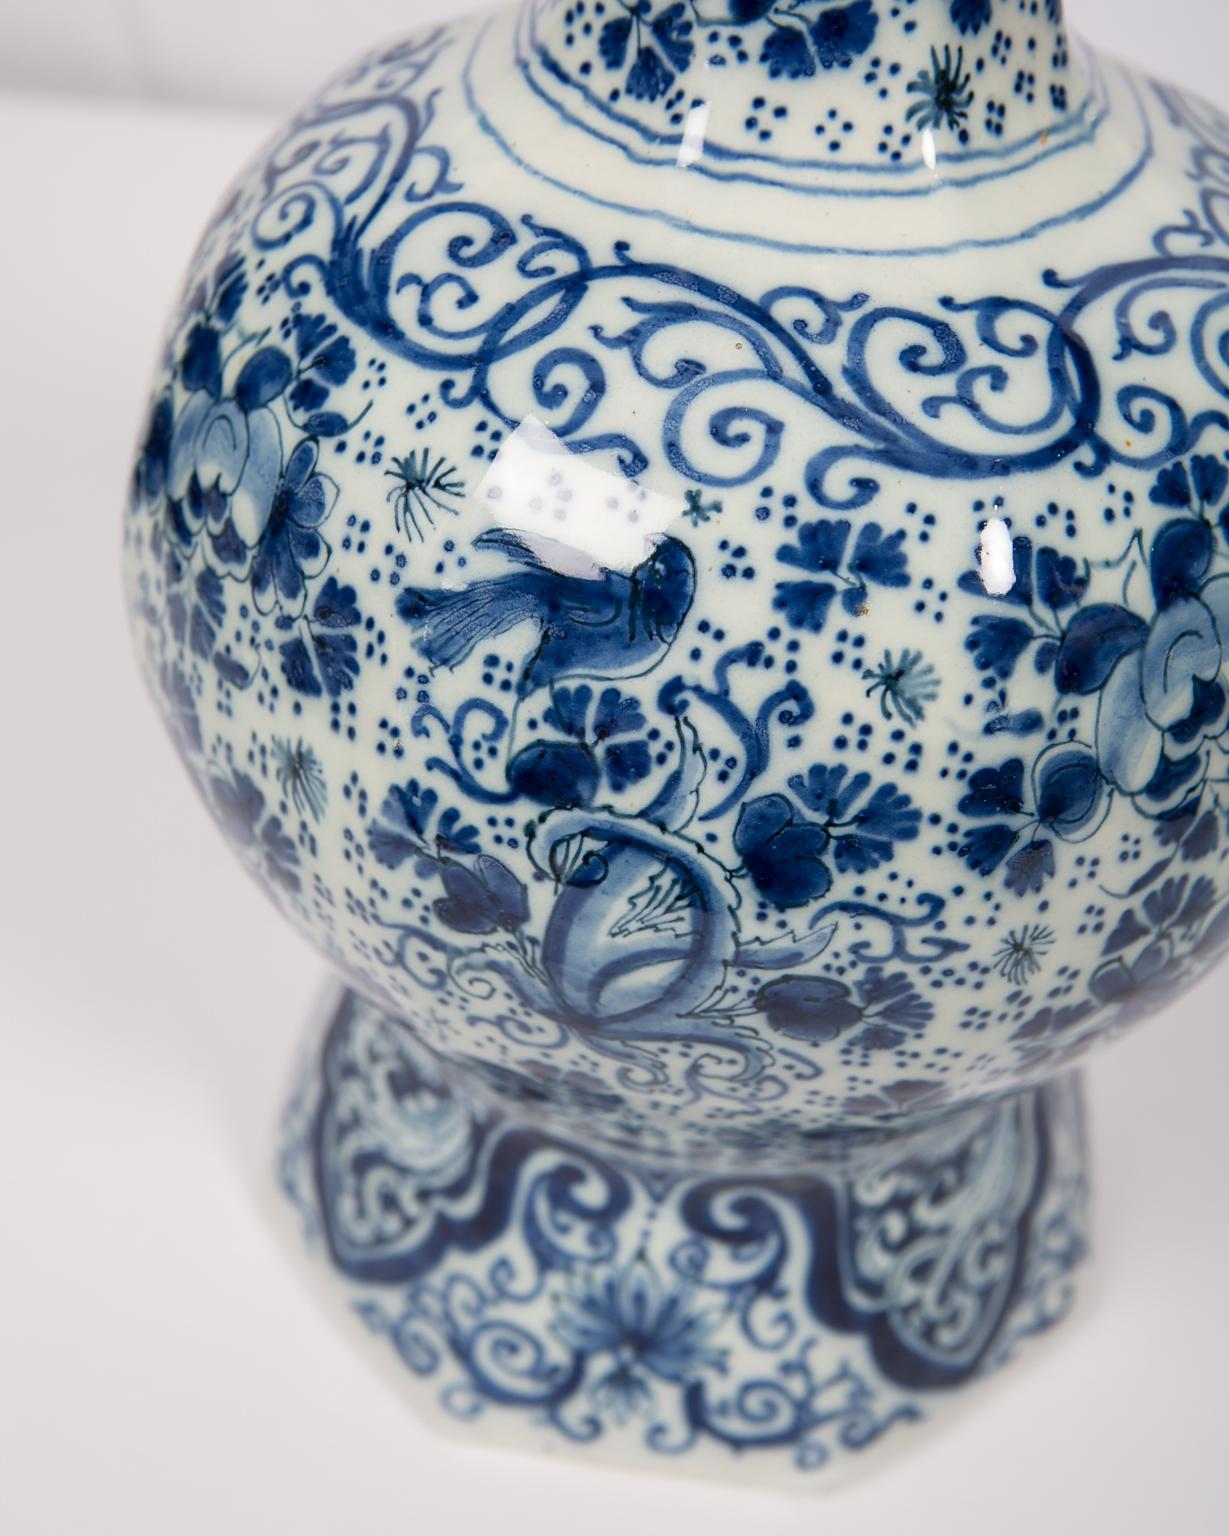 Antique Blue and White Delft vase hand-painted with a lovely all around pattern of songbirds among large flowers and scrolling vines. Made circa 1700-1705, the vase is decorated in deep cobalt blue. The octagonal design was popular in the time and